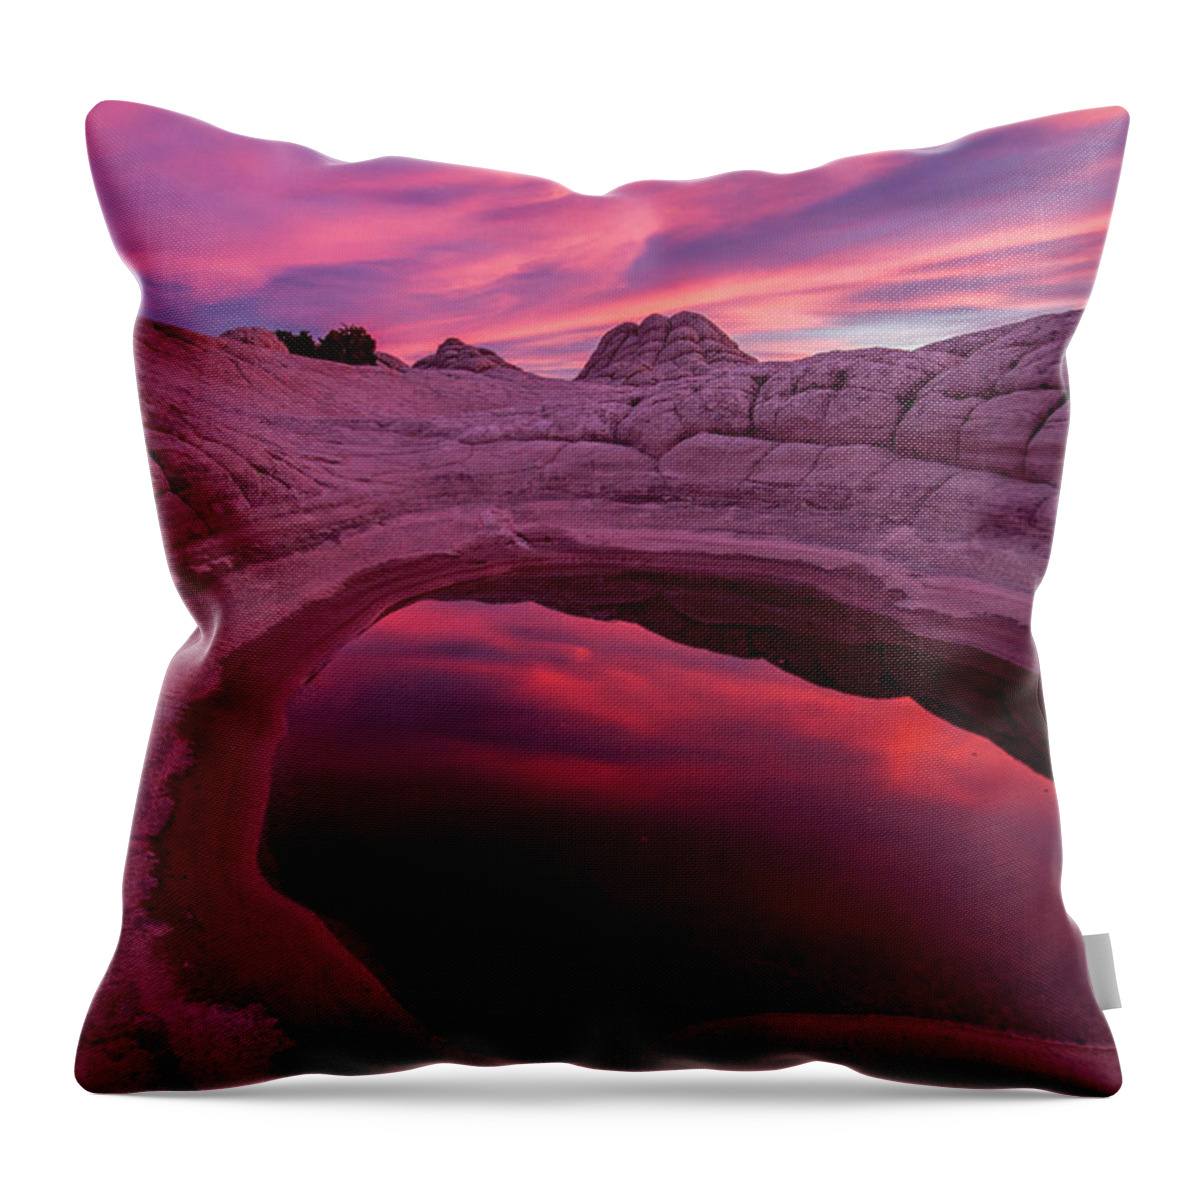 White Pocket Throw Pillow featuring the photograph White Pocket Sunset by Wesley Aston